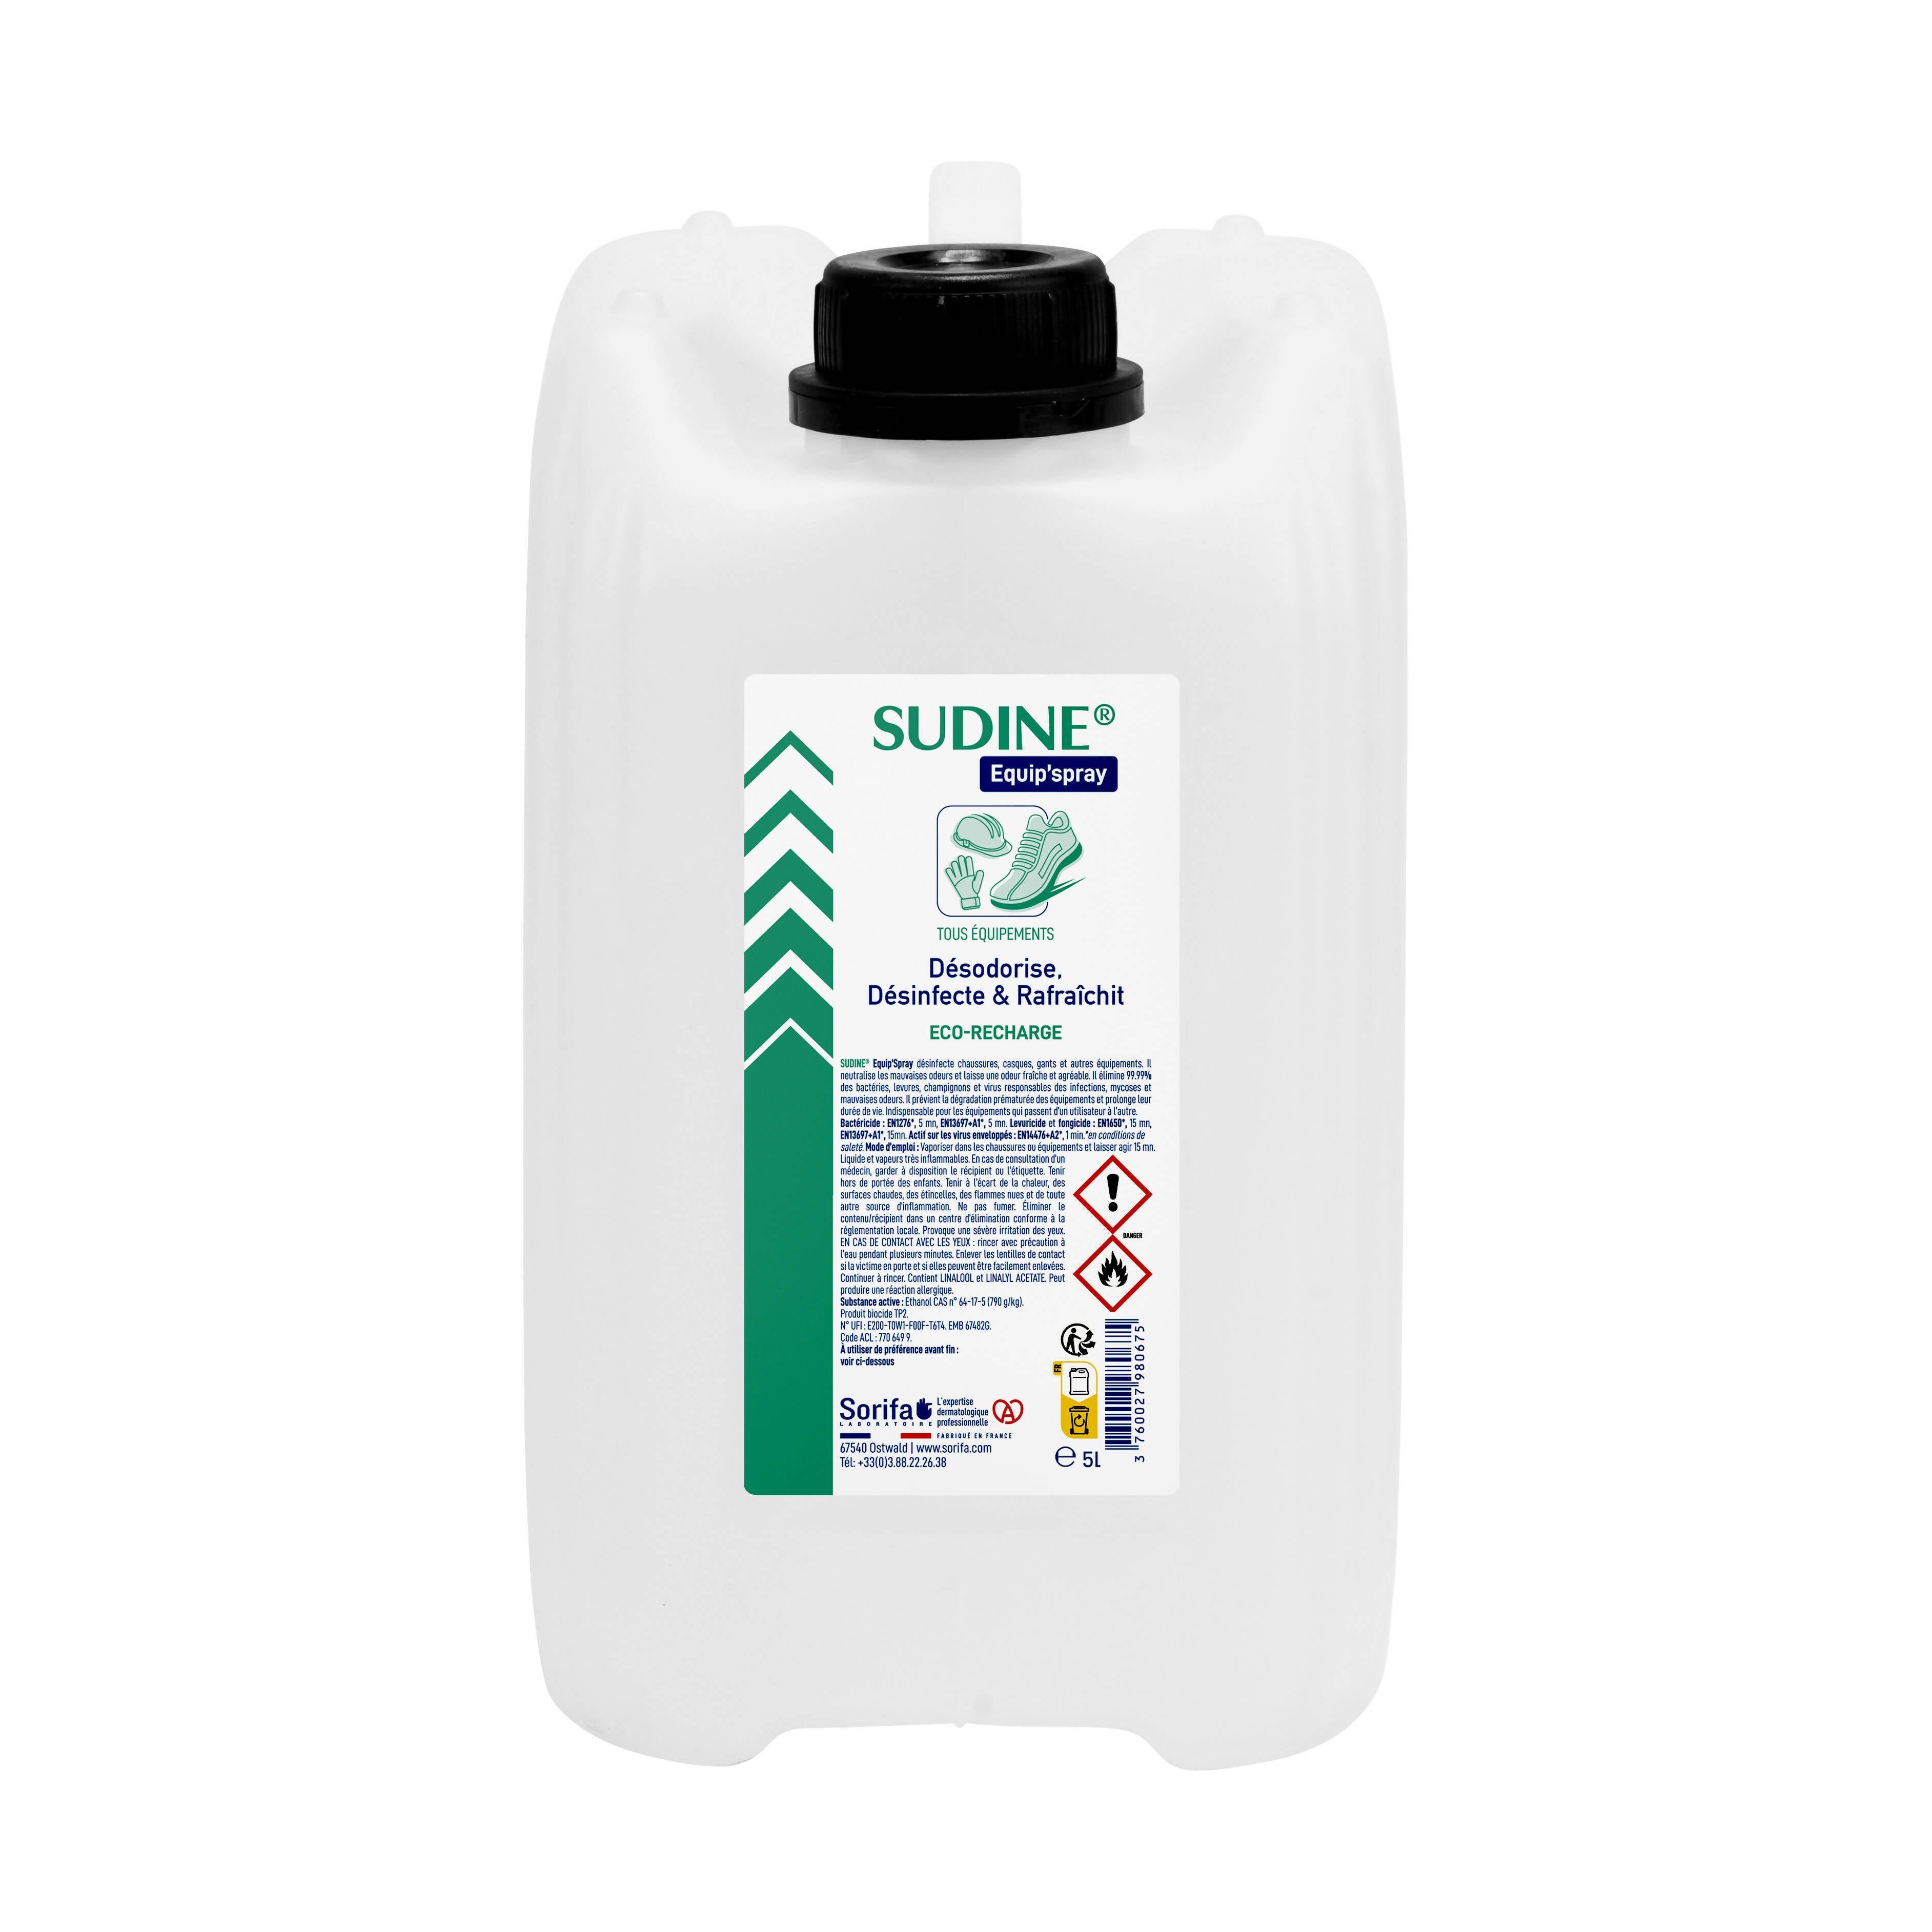 SORIFA - Set of 2 - Sudine Equip'spray - Deodorizes, disinfects, refreshes - Shoes, helmets, gloves, equipment - 5L refill for SUDINE Equip'spray 50 and 125 ml or for the 1L SORIFA Spray - 0